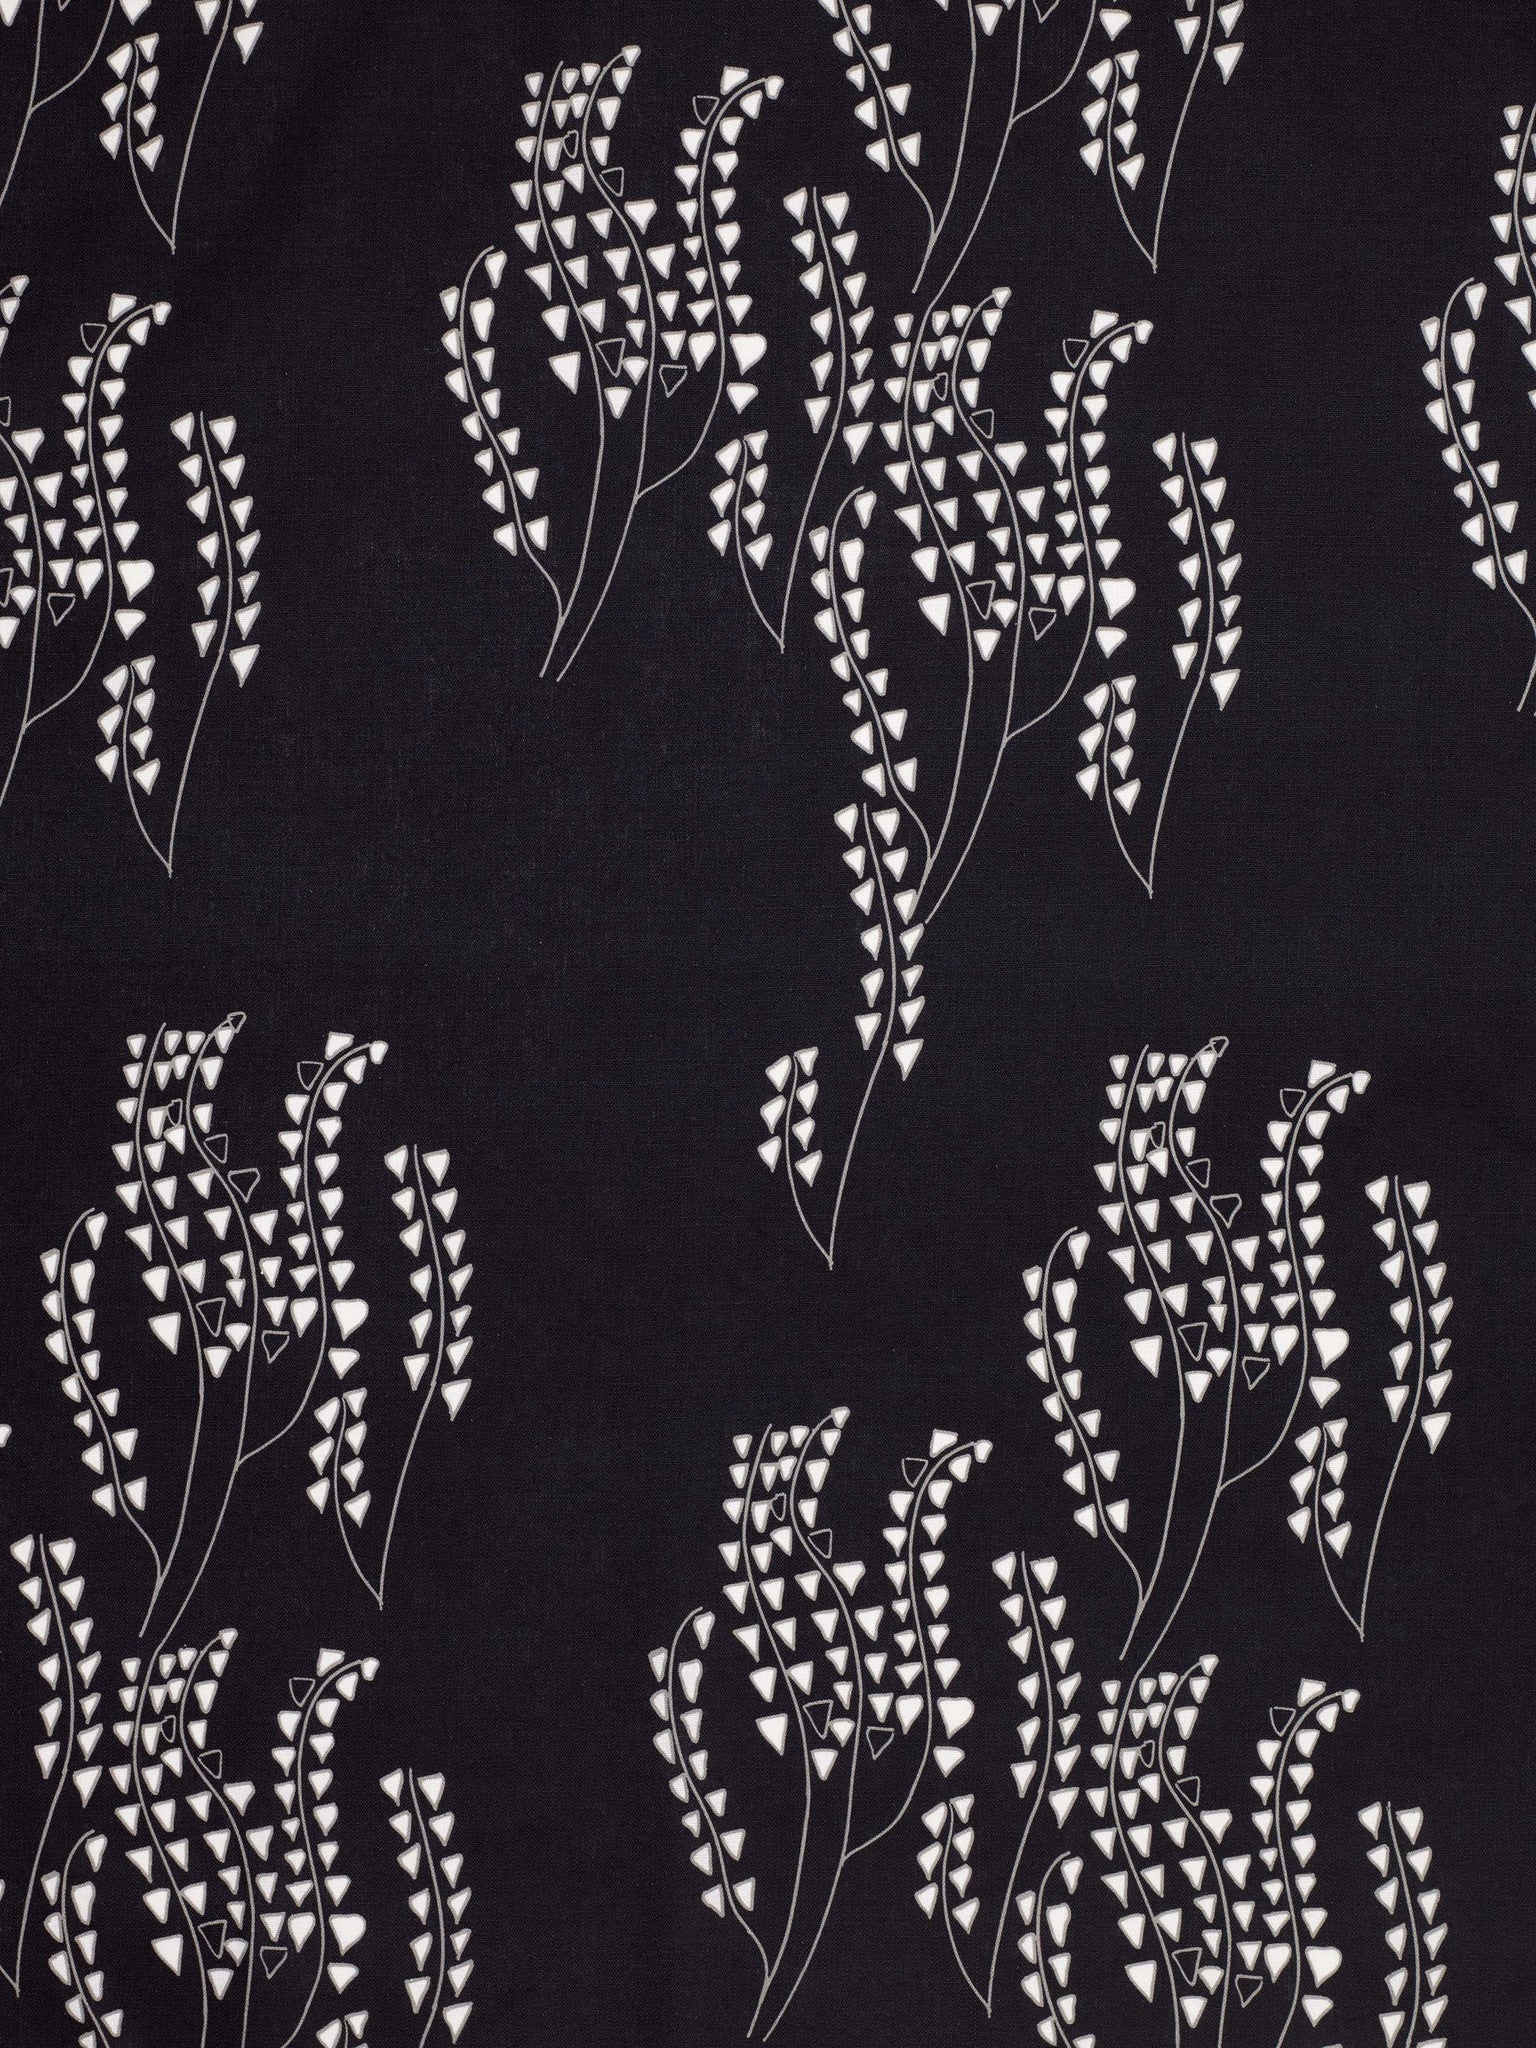 Yuma graphic grass pattern floral cotton linen home decor interiors fabric by the yard or meter for curtains, blinds, upholstery in black and grey ships from Canada (USA)